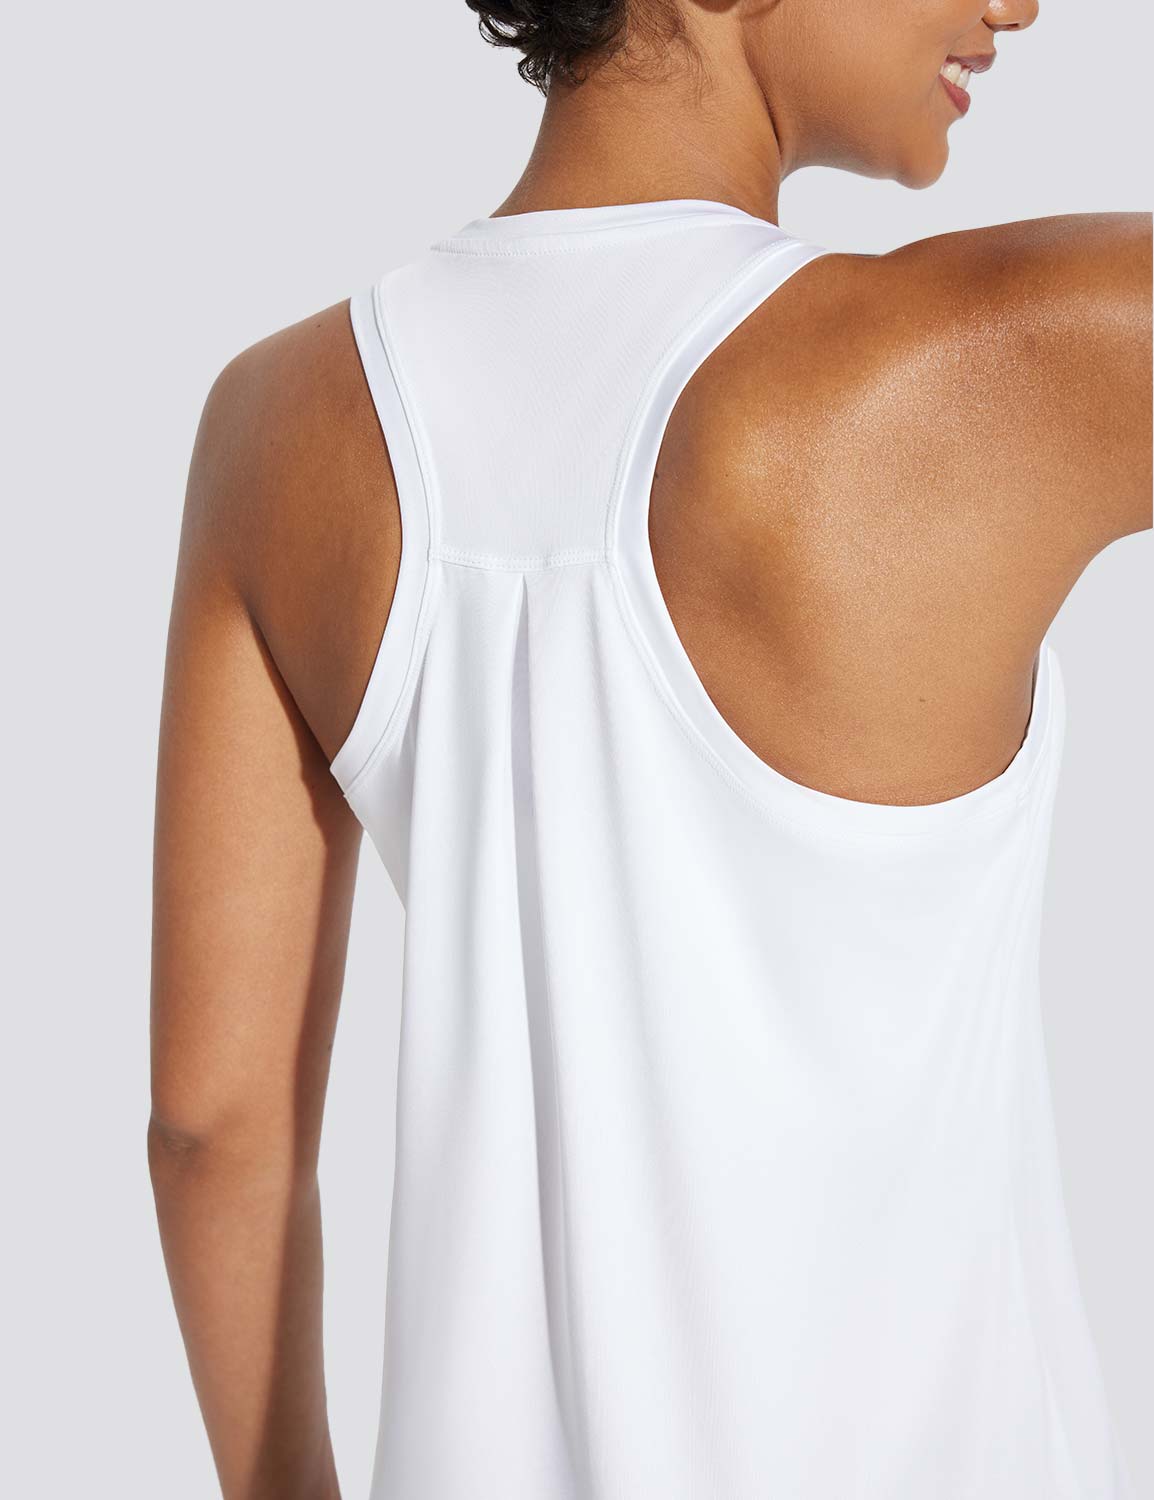 Baleaf Women's Quick-Dry Neck-Length Tank Top Lucent White Back